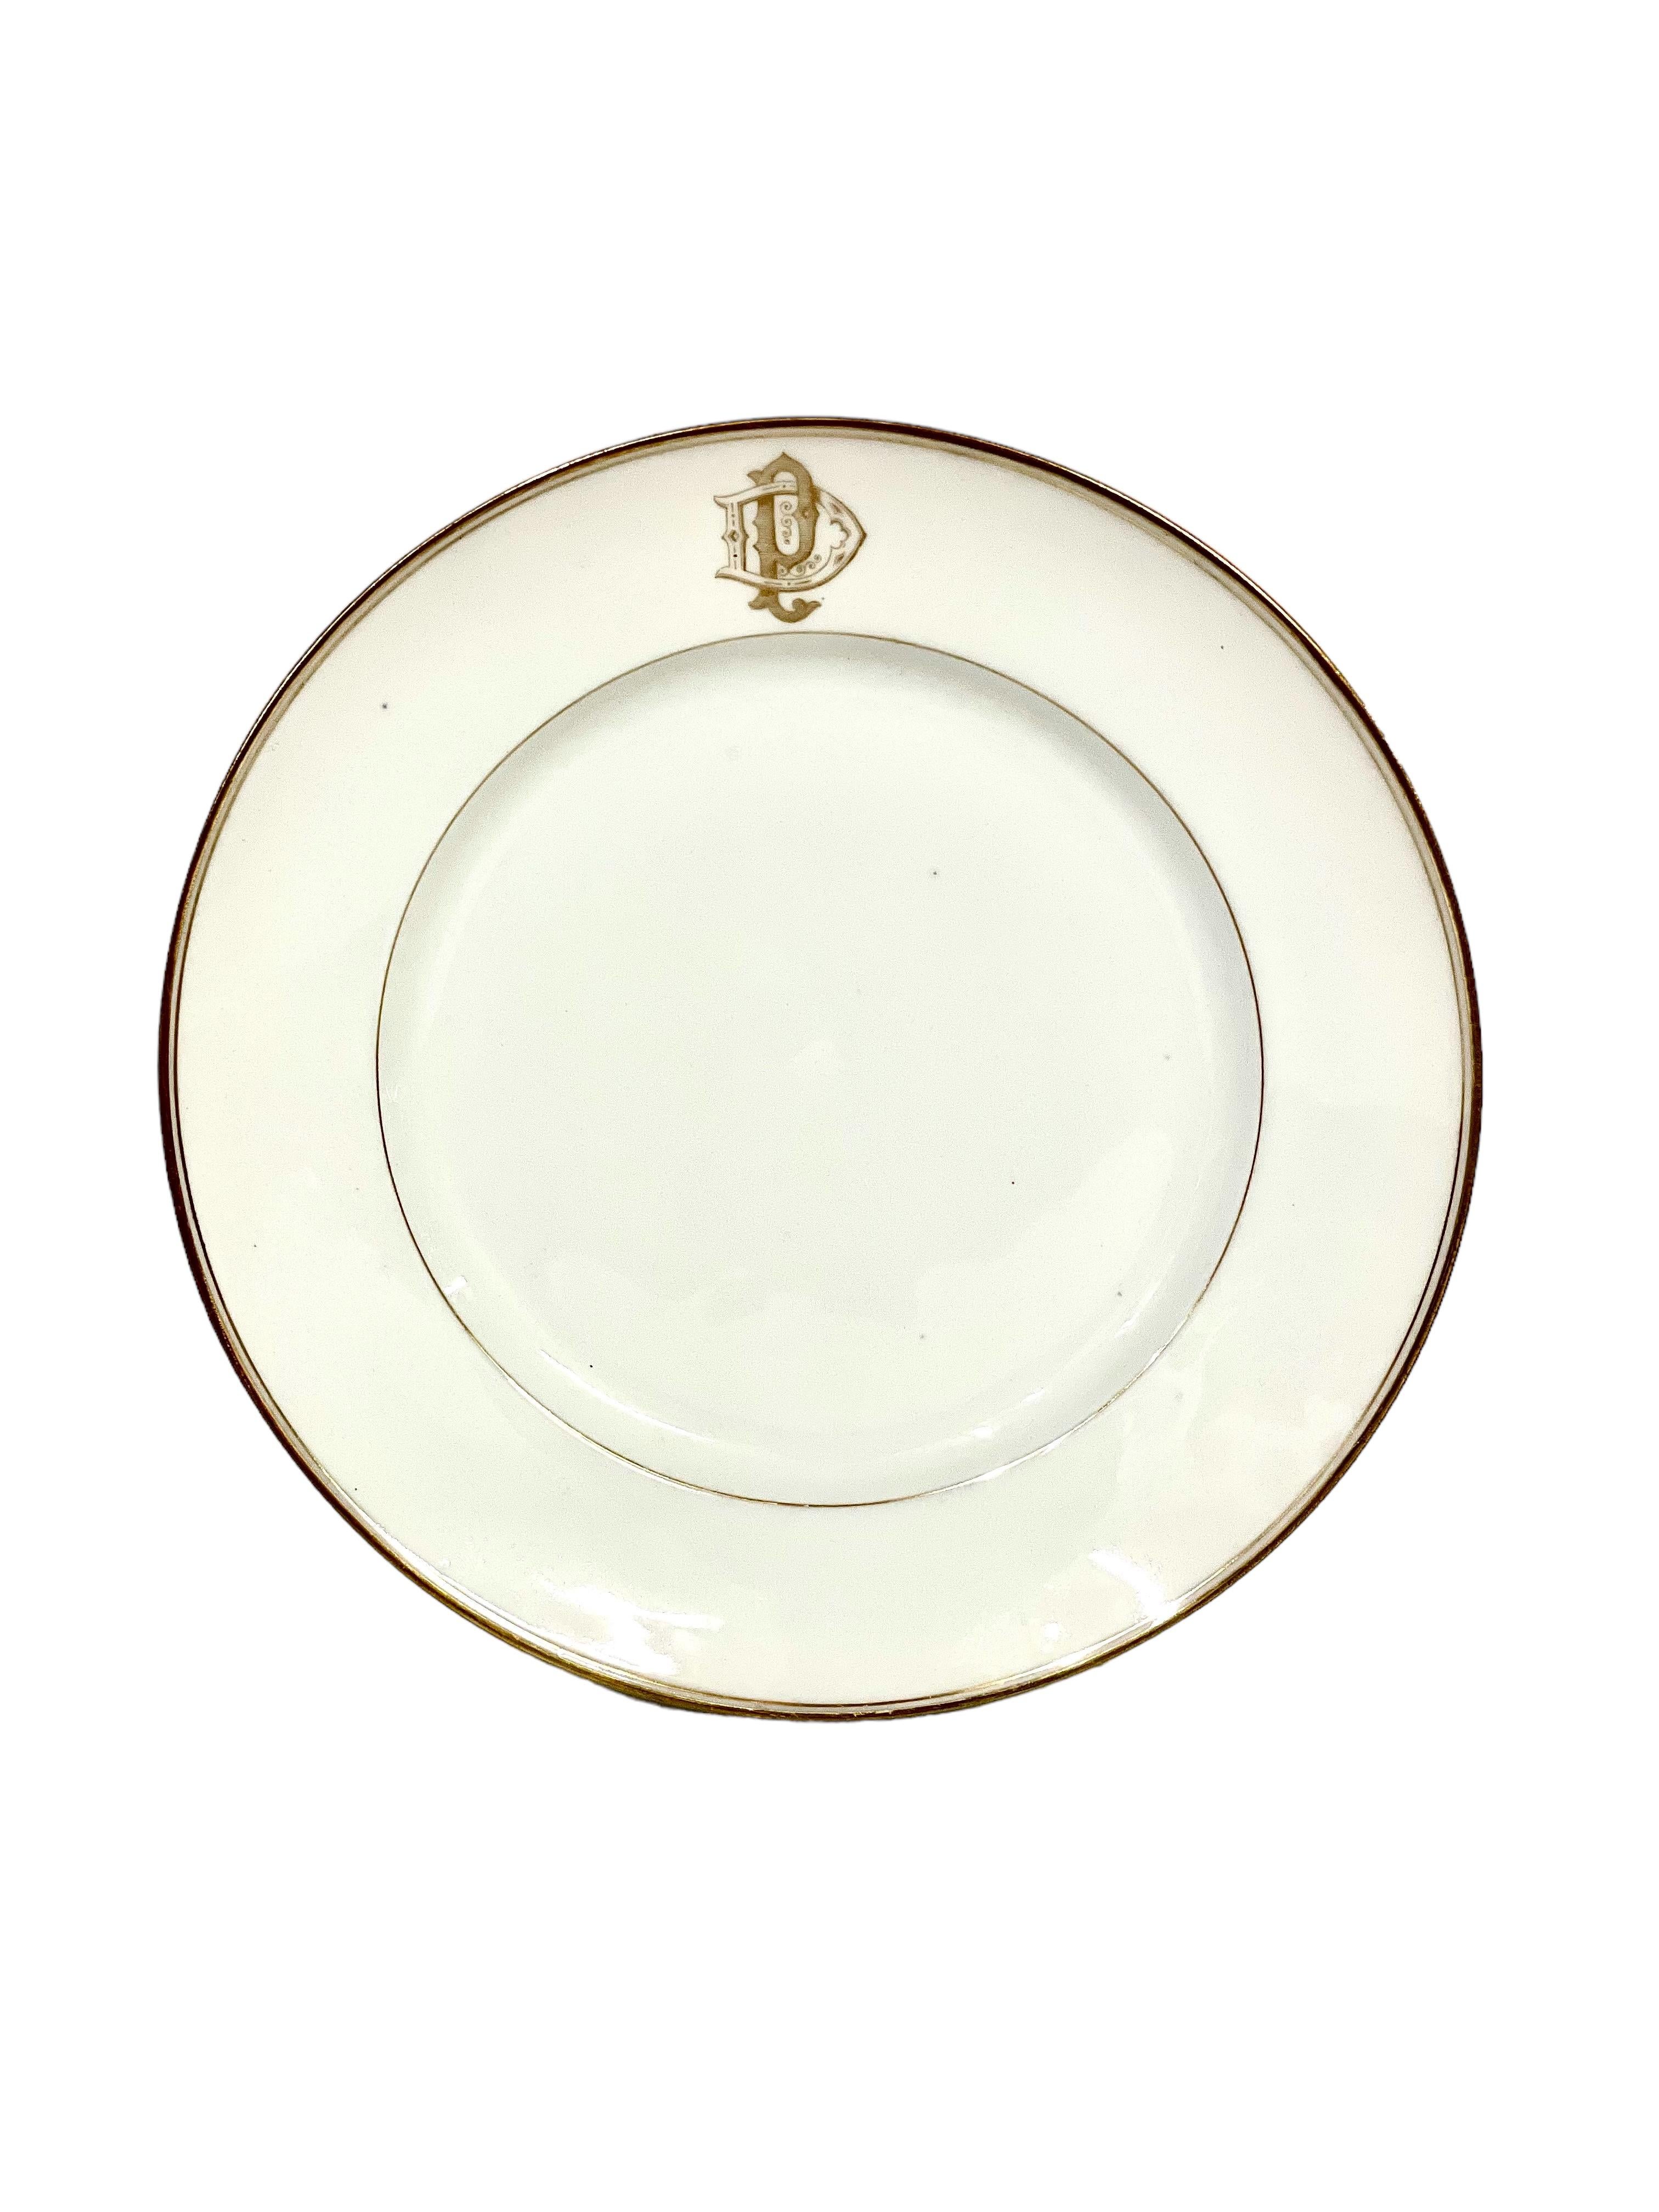 A set of 12 stylish dessert plates in delicate white Limoges porcelain, each piece edged with a fine rim of gilt, and bearing the elaborately formed monogramme 'DP'. Dating from the late 19th century, the set is in excellent overall condition, with